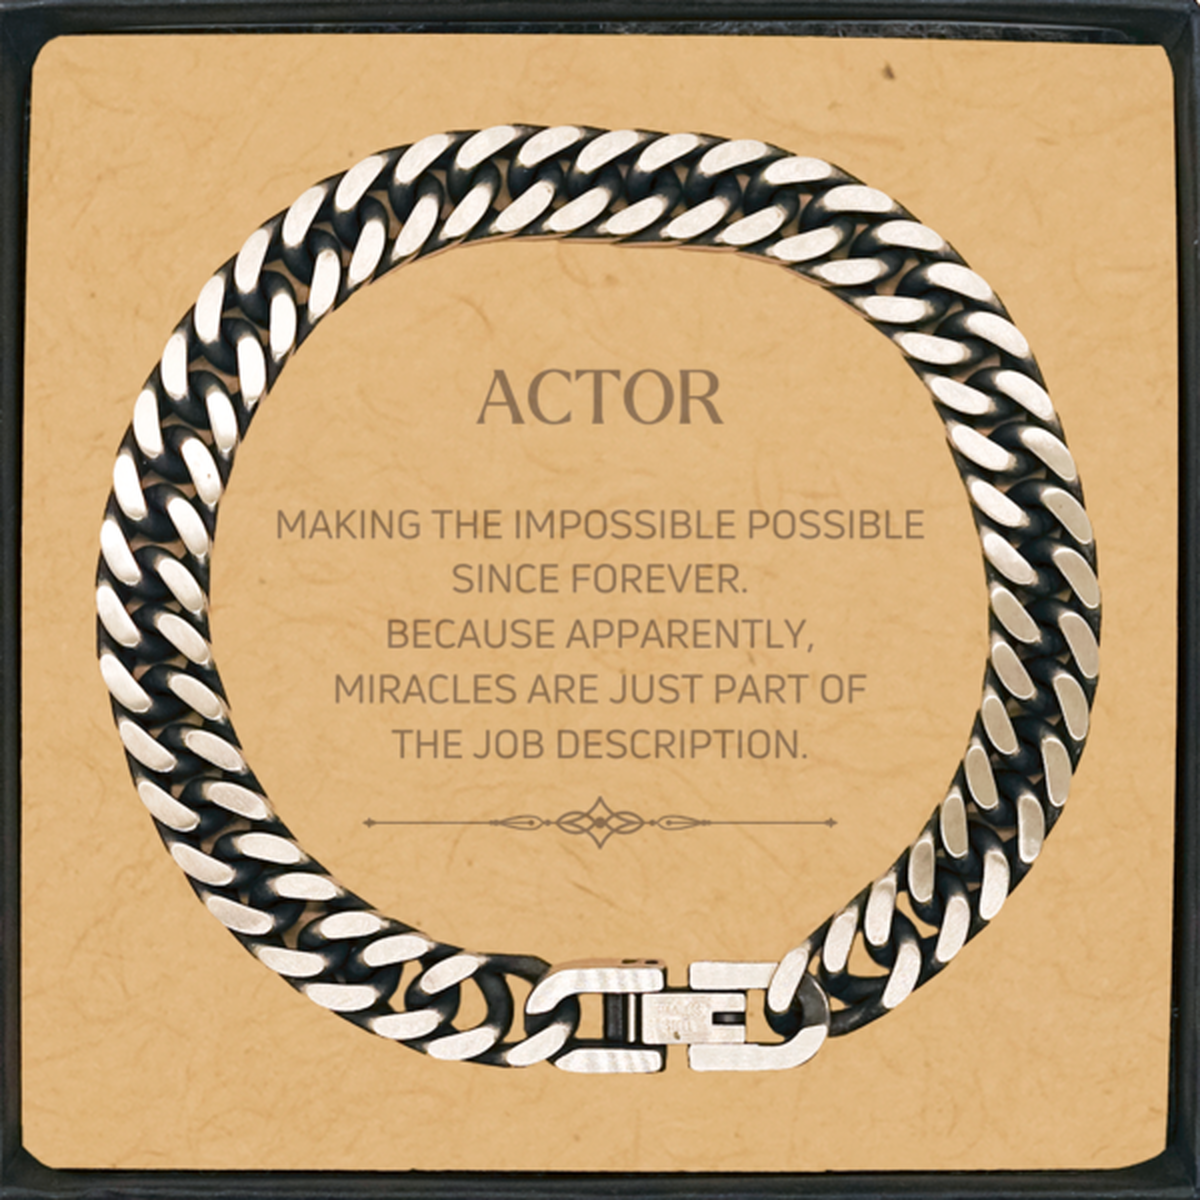 Funny Actor Gifts, Miracles are just part of the job description, Inspirational Birthday Cuban Link Chain Bracelet For Actor, Men, Women, Coworkers, Friends, Boss